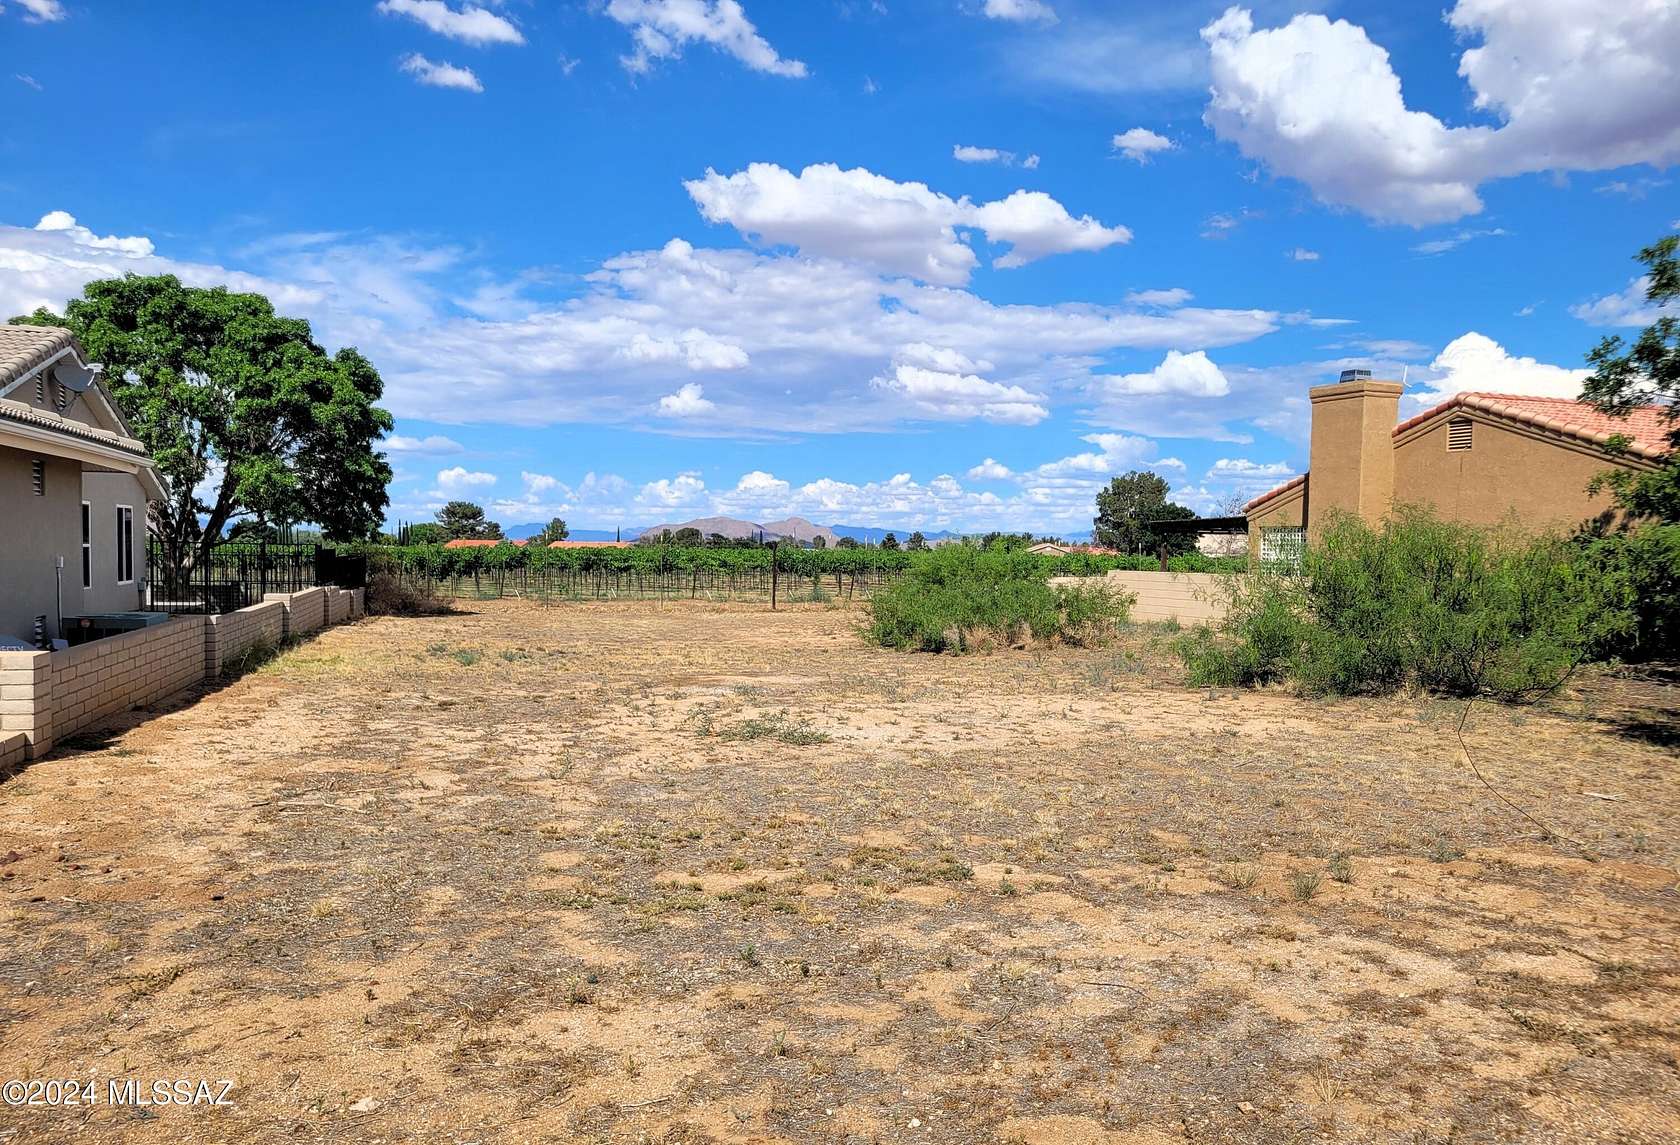 0.19 Acres of Residential Land for Sale in Pearce, Arizona